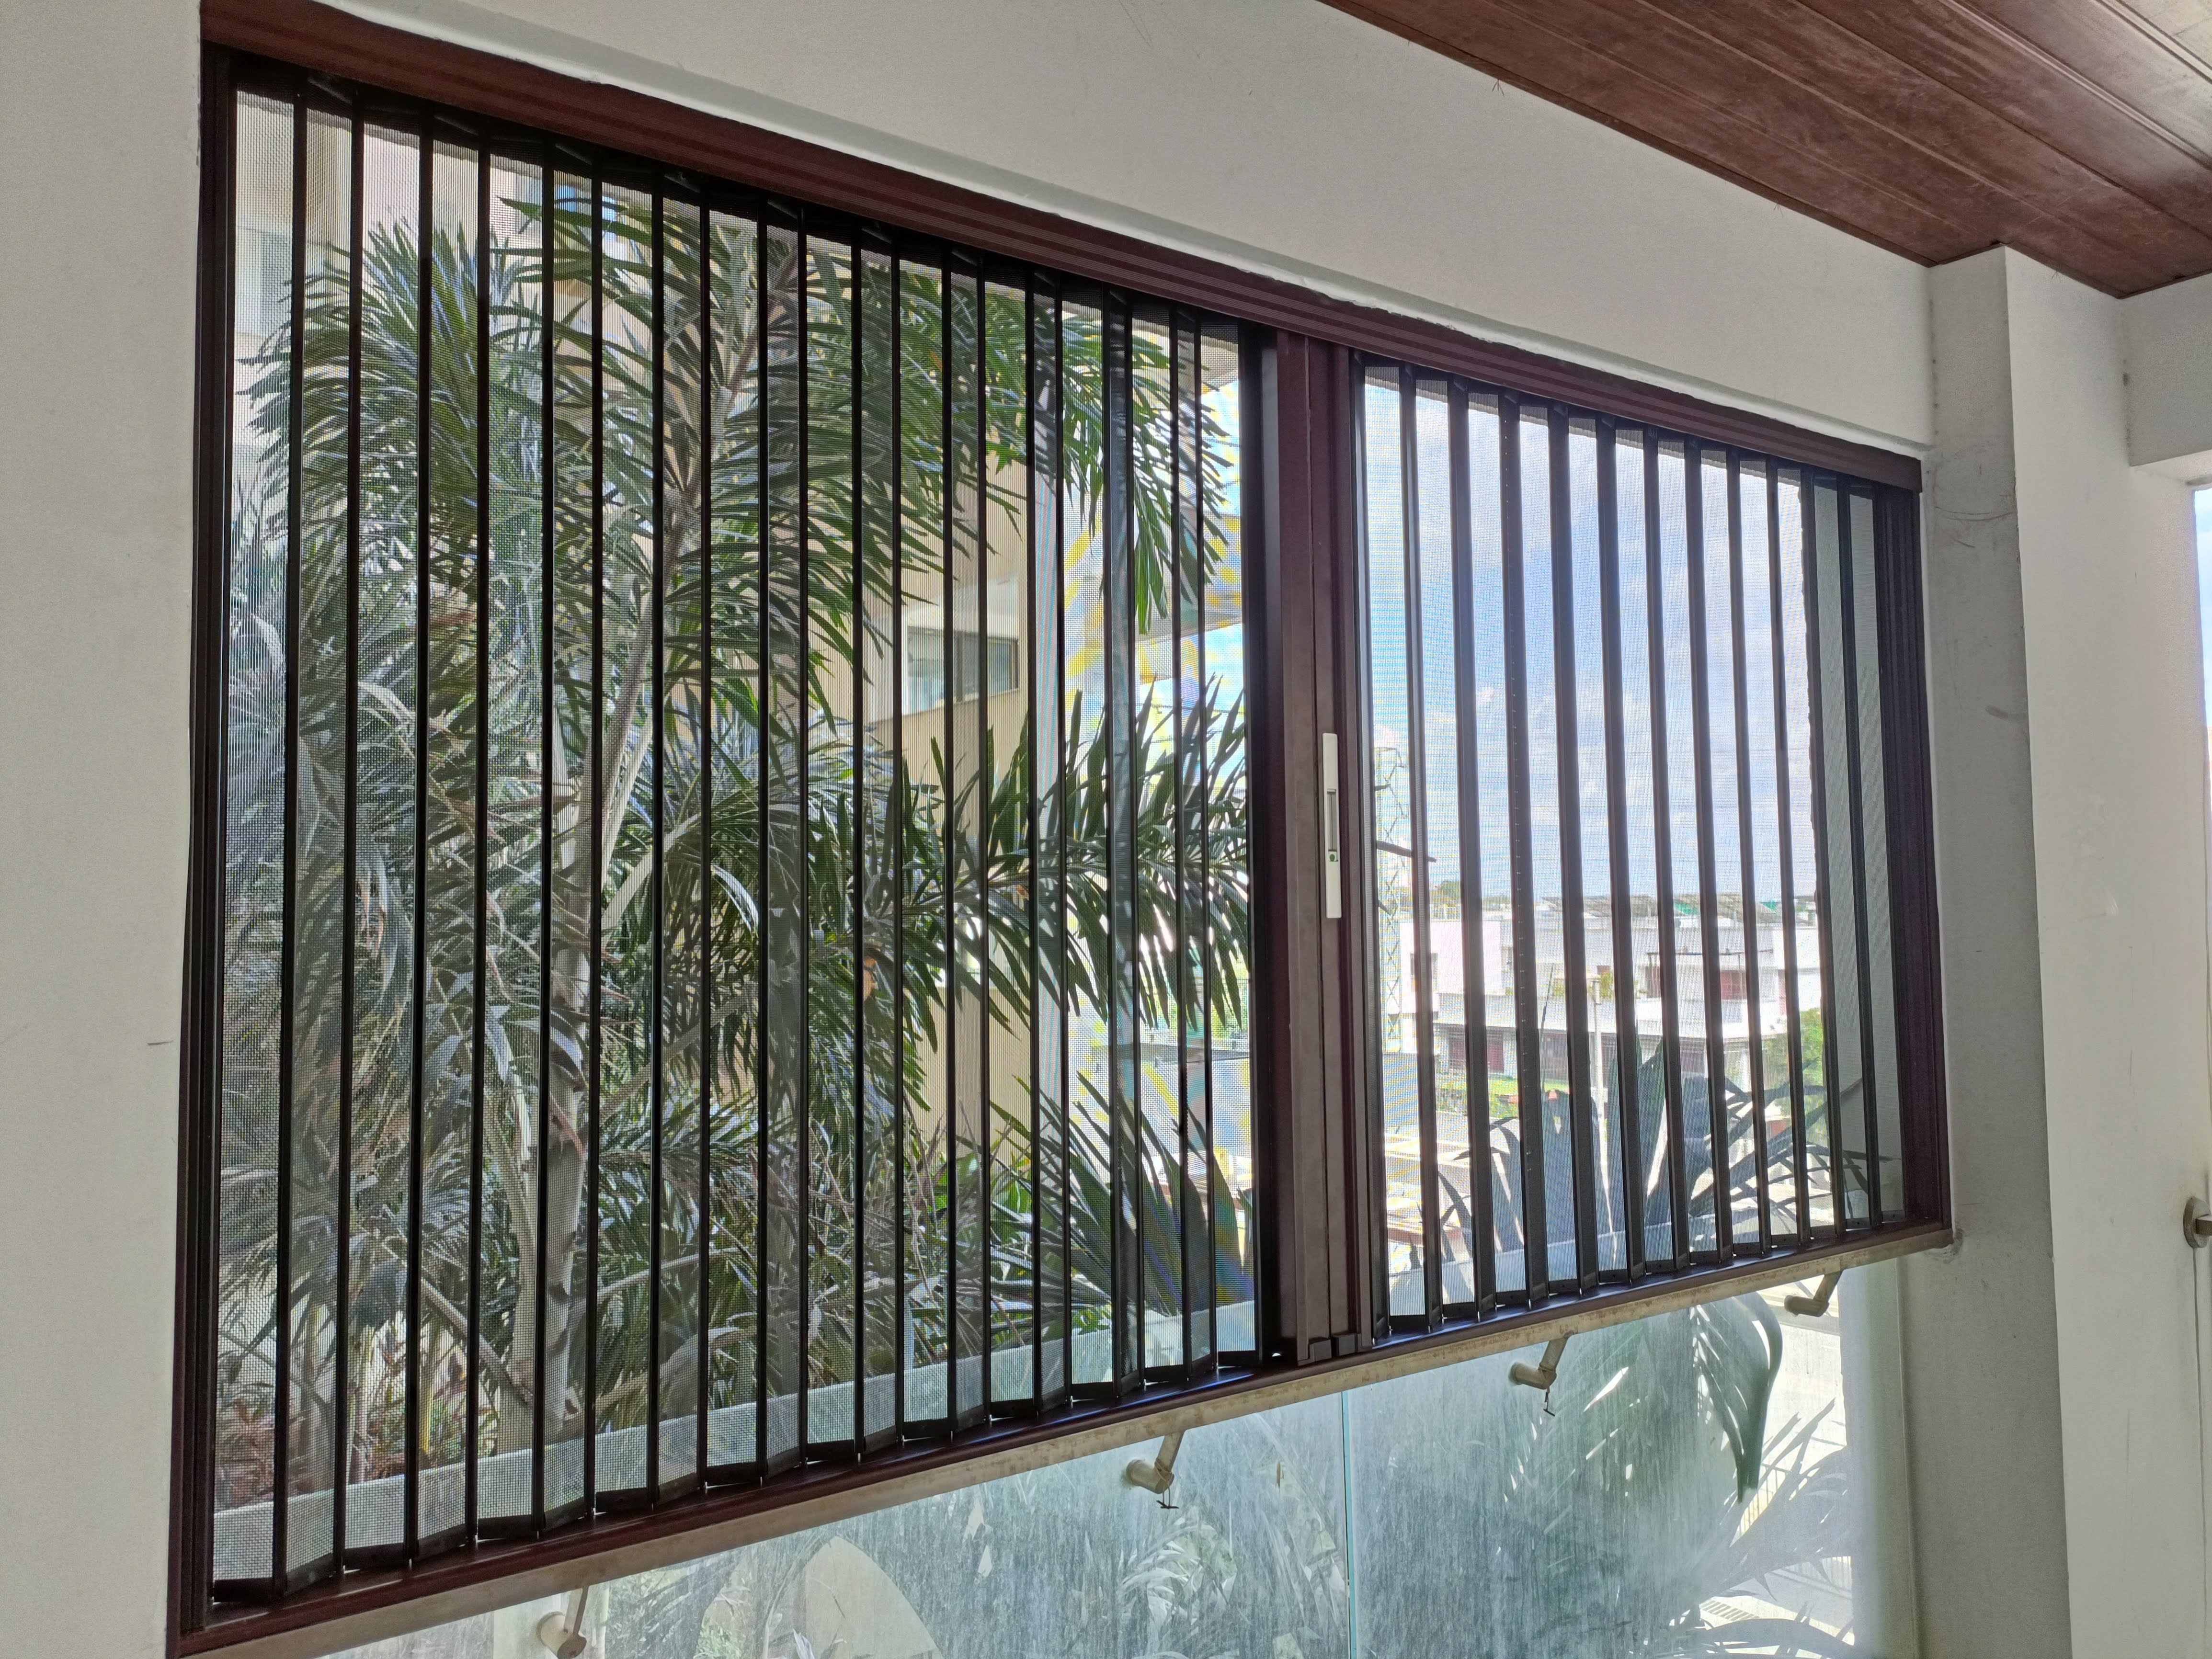 Sliding Security Screen For Window